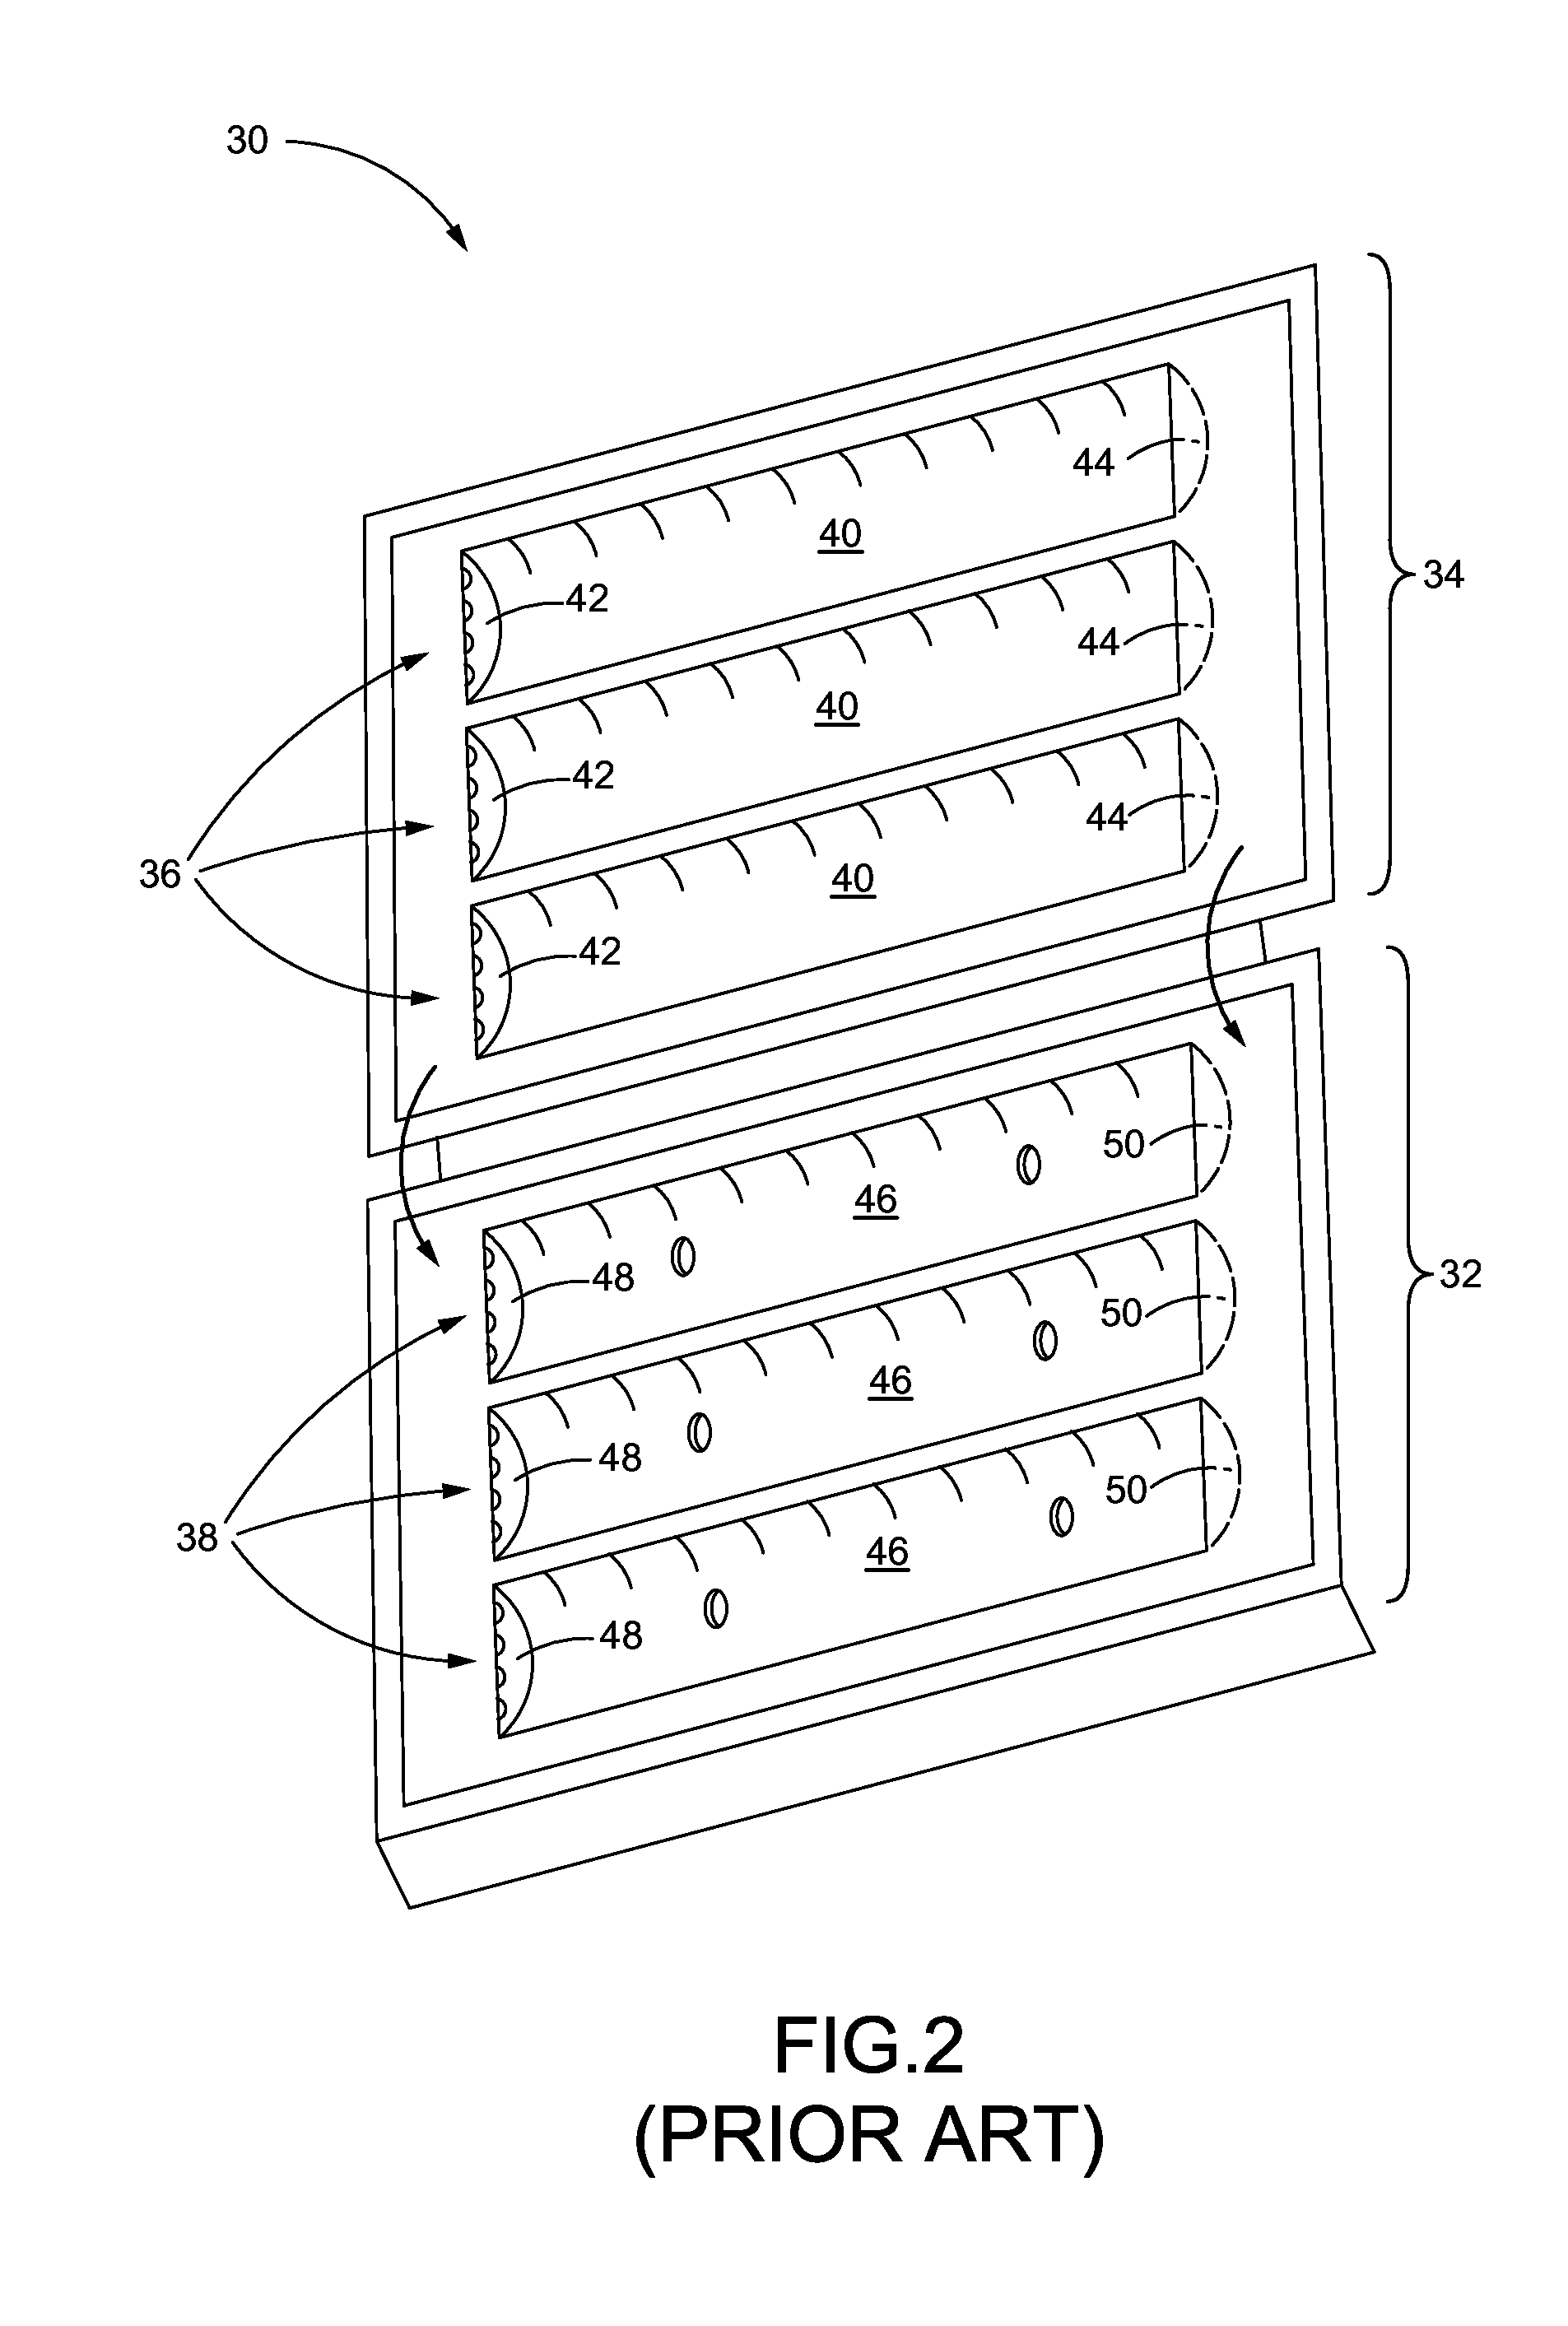 Apparatus and Method for Forming a Design on an Expanded Bead Foam Article